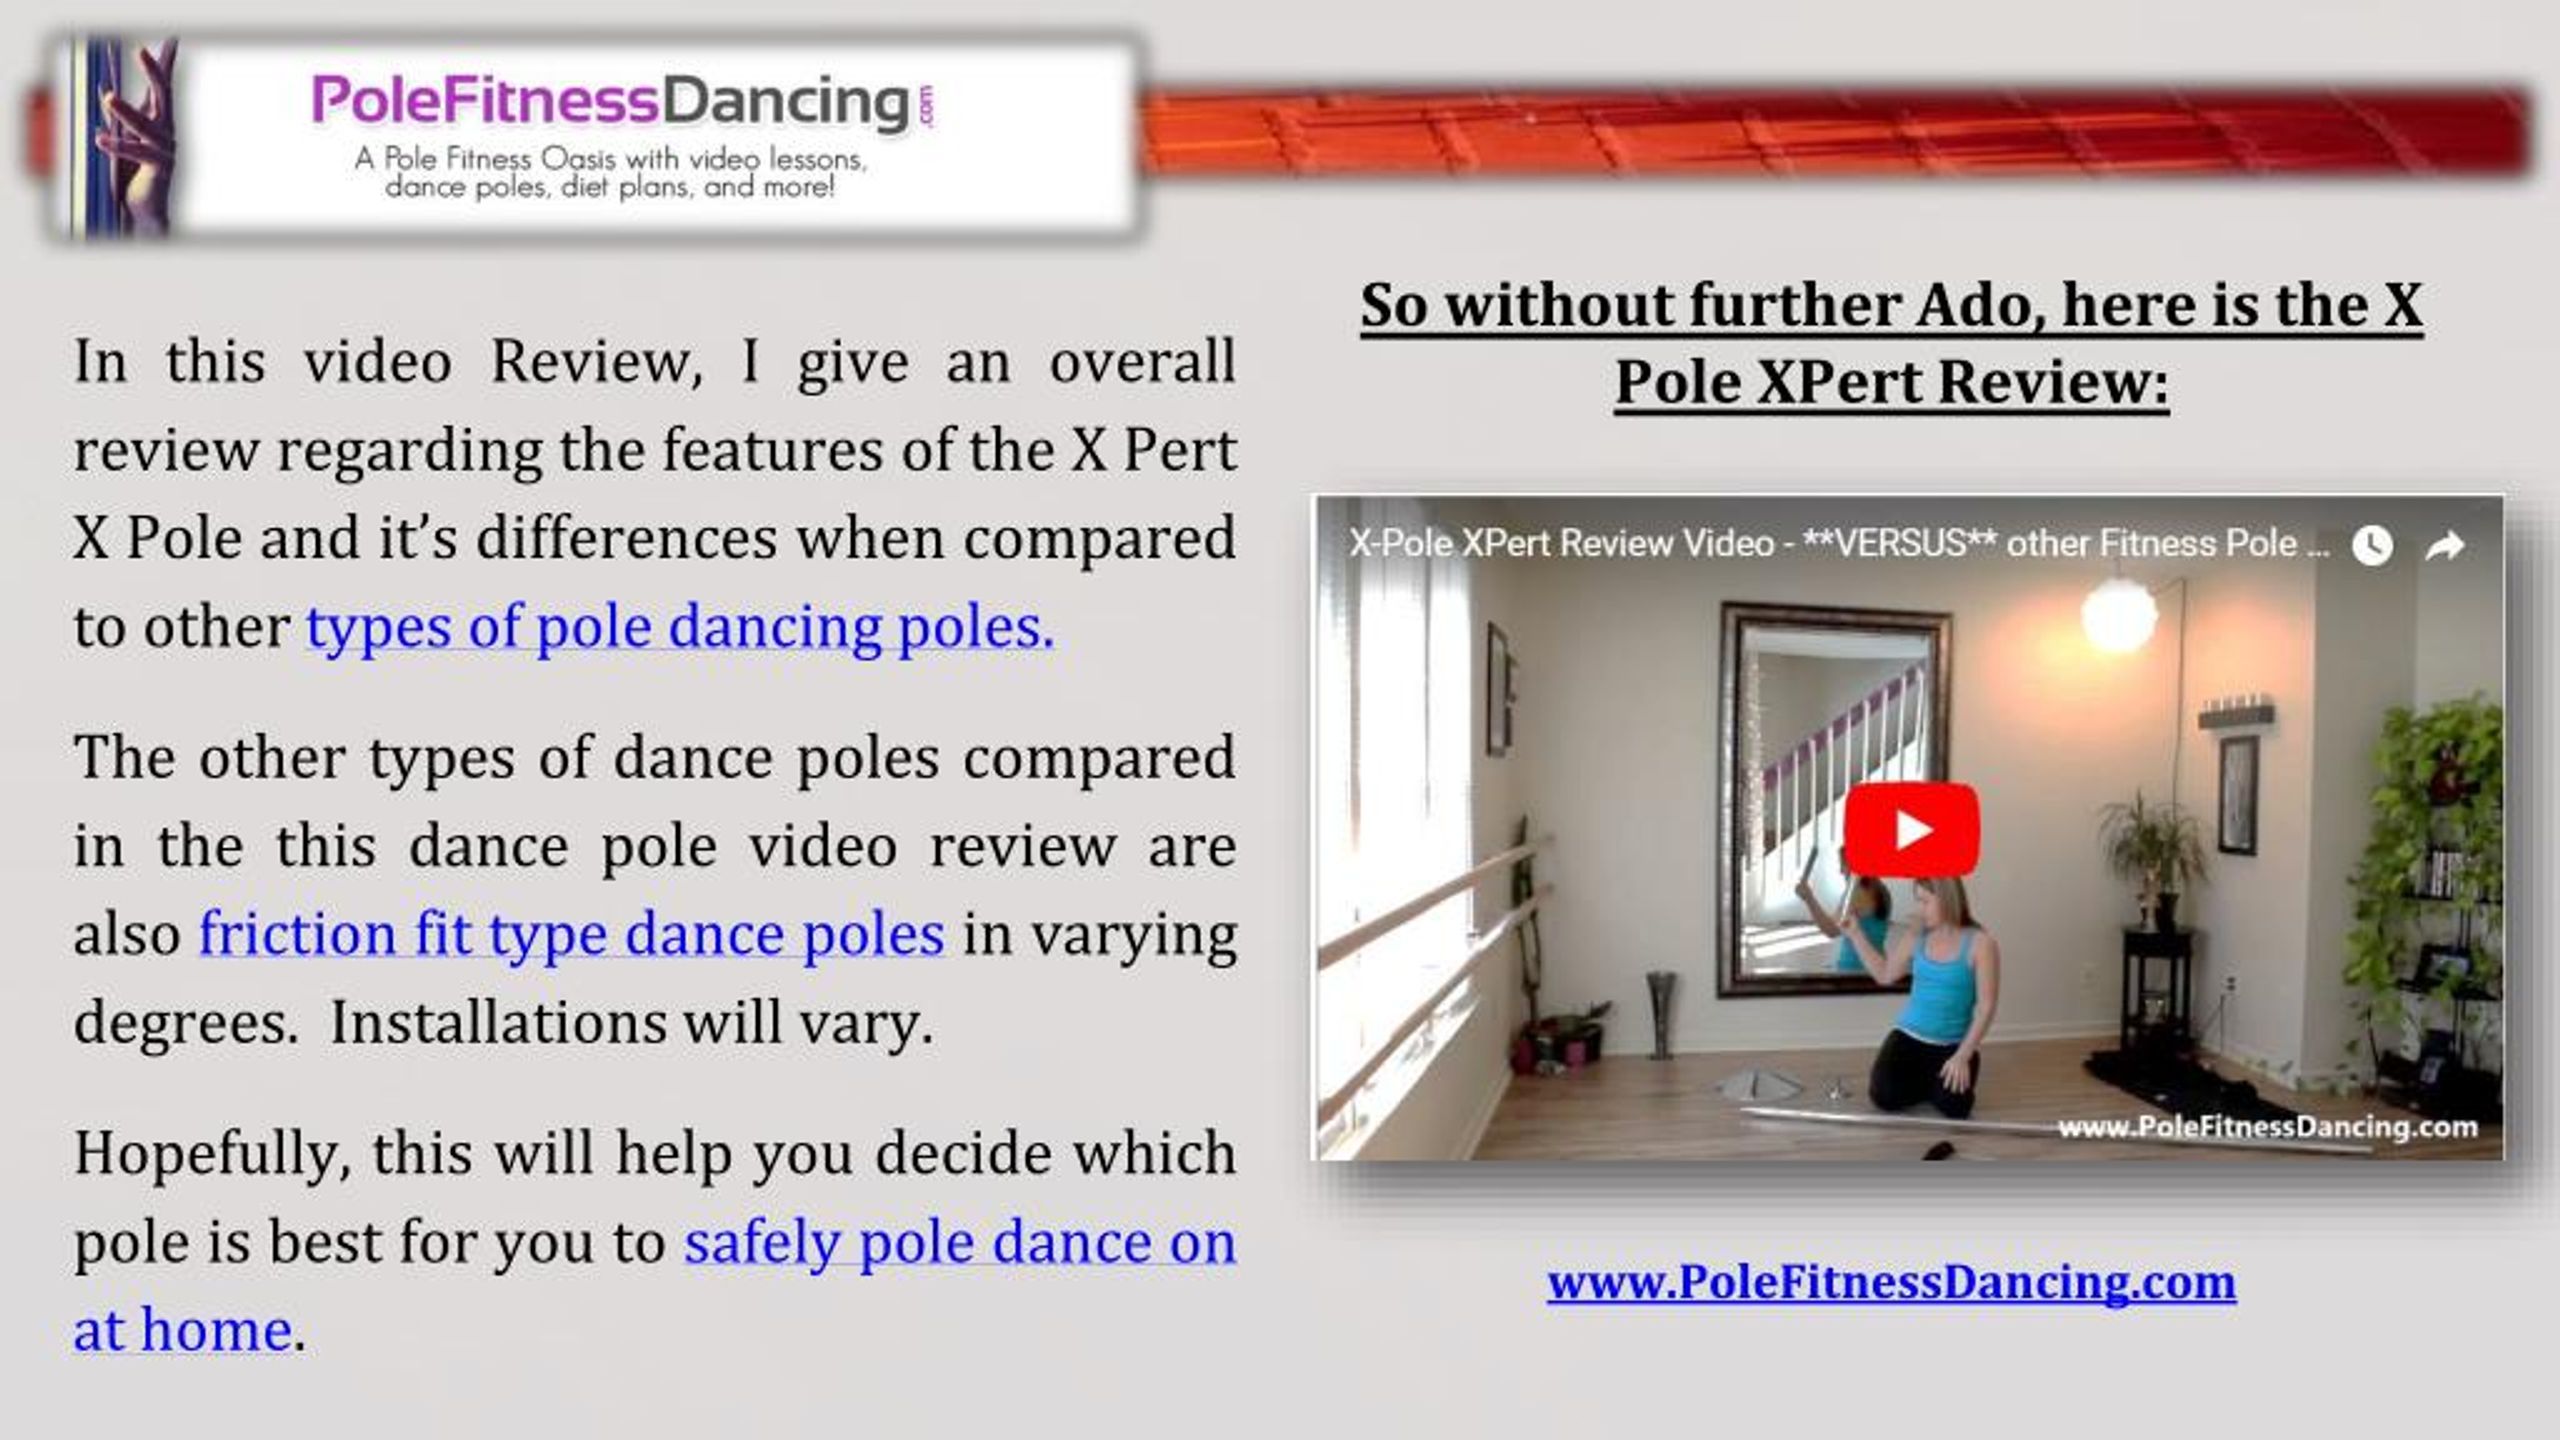 Ppt X Pole Xpert Review Versus Other Types Of Pole Dancing Poles